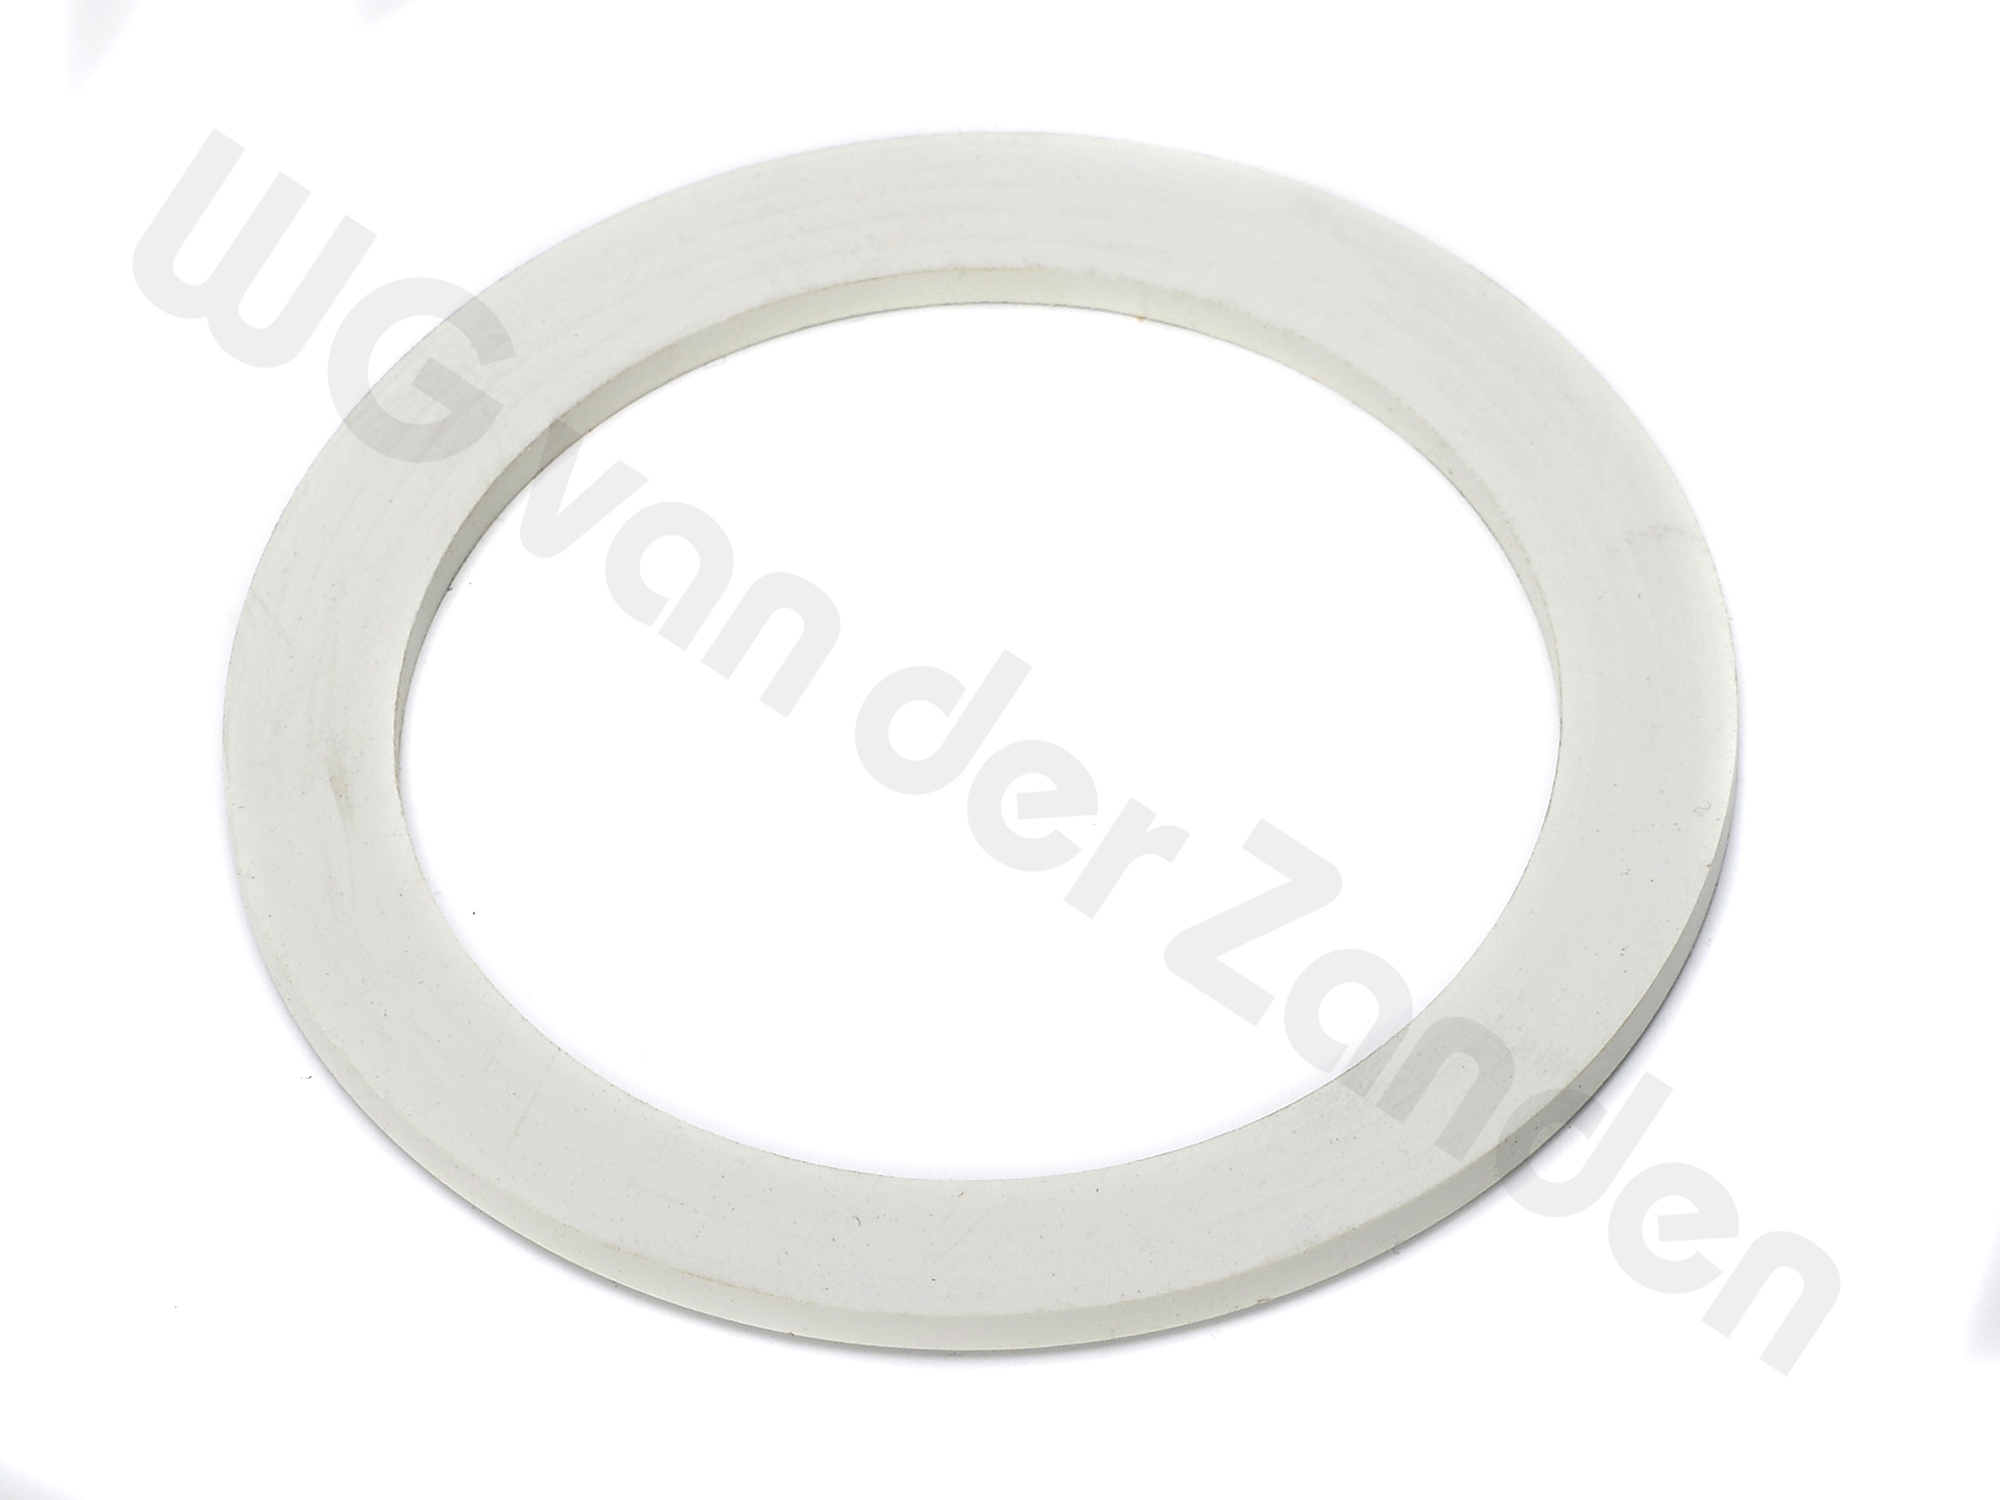 239205 COFFEE MAKER SPARE RUBBER RING 1 CUP